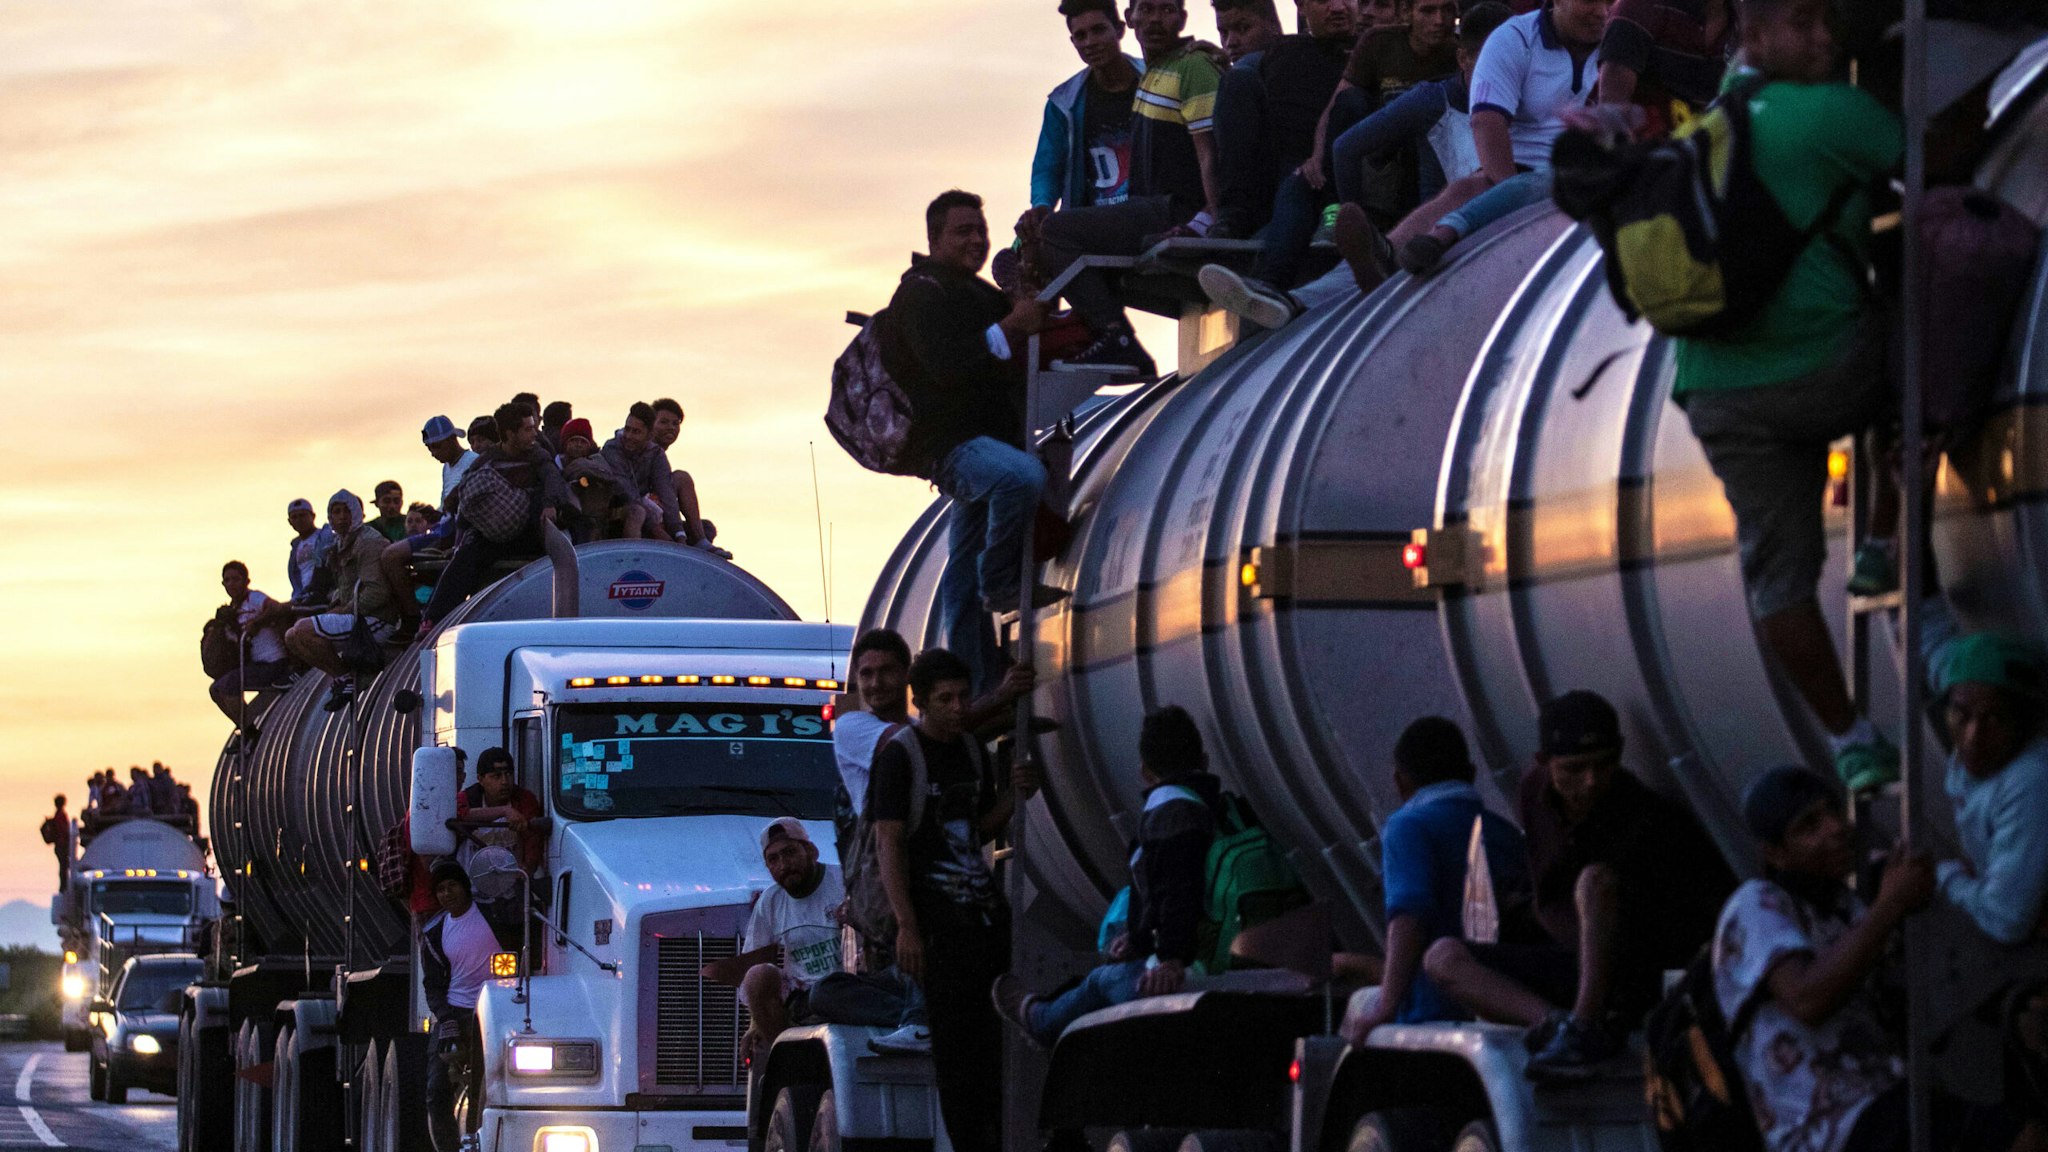 TOPSHOT - A truck carrying mostly Honduran migrants taking part in a caravan heading to the US drives from Santiago Niltepec to Juchitan, near the town of La Blanca in Oaxaca State, Mexico, on October 30, 2018. - The Pentagon is deploying 5,200 active-duty troops to beef up security along the US-Mexico border, officials announced Monday, in a bid to prevent a caravan of Central American migrants from illegally crossing the frontier.